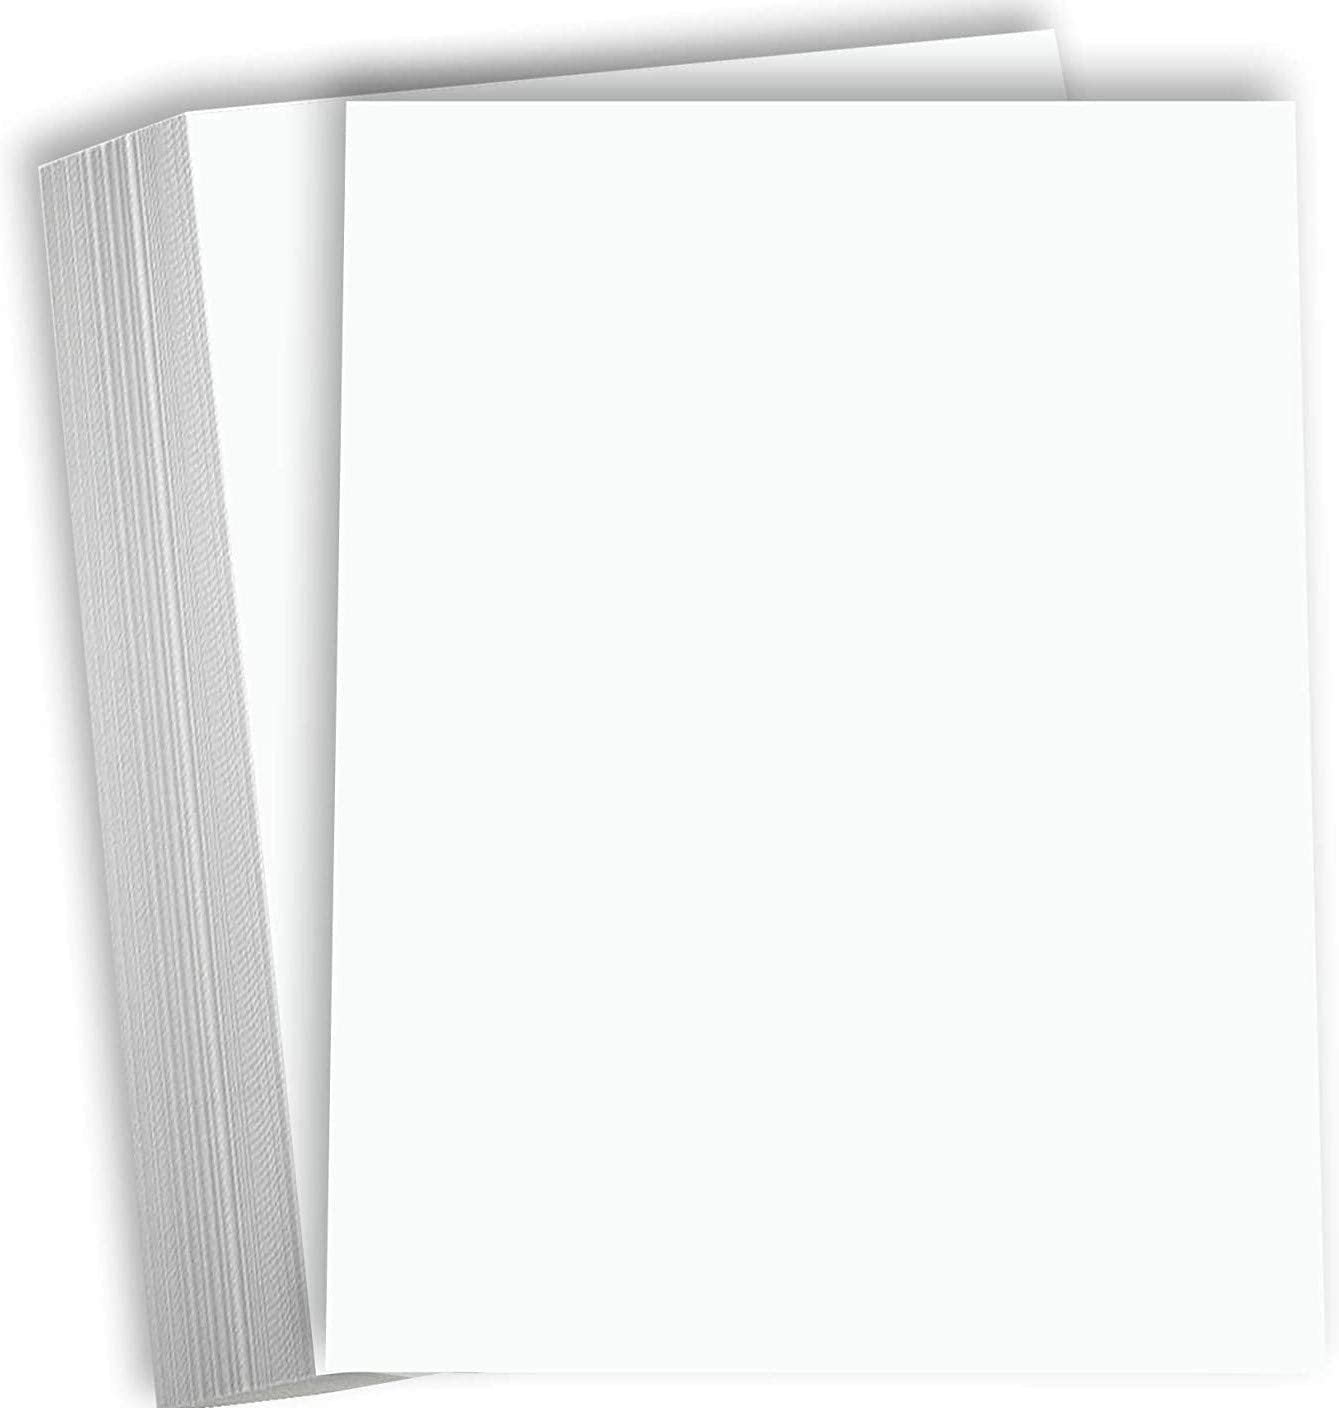 Greeting Invitations Stationary 5 X 7 Heavy weight 80 lb Card Stock 100 Pack Blank Index Flash Note & Post Cards with Rounded Corners Hamilco White Cardstock Thick Paper